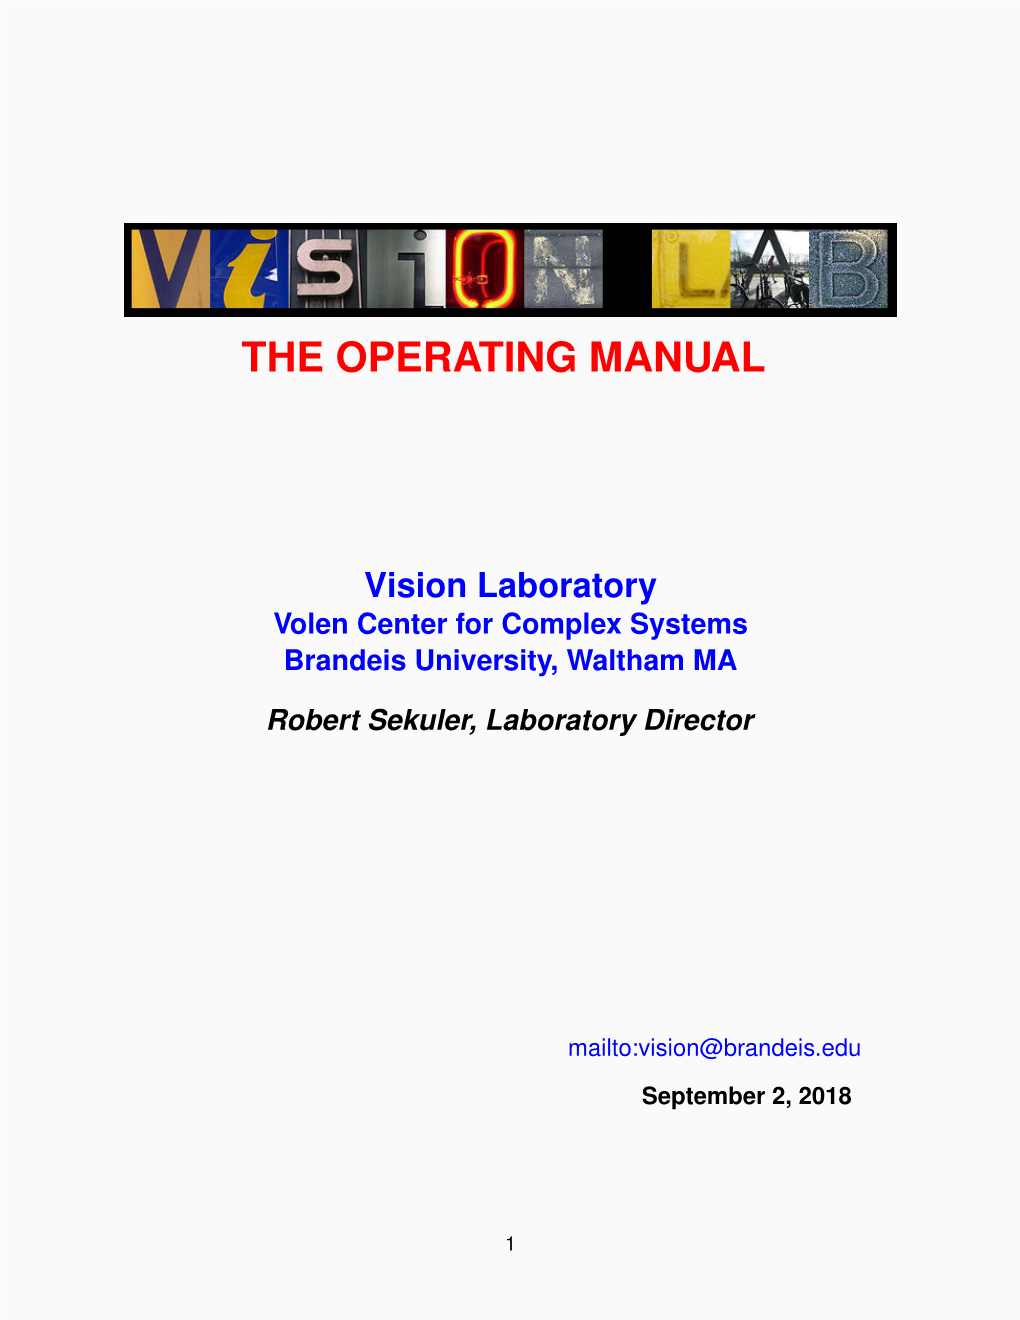 The Operating Manual